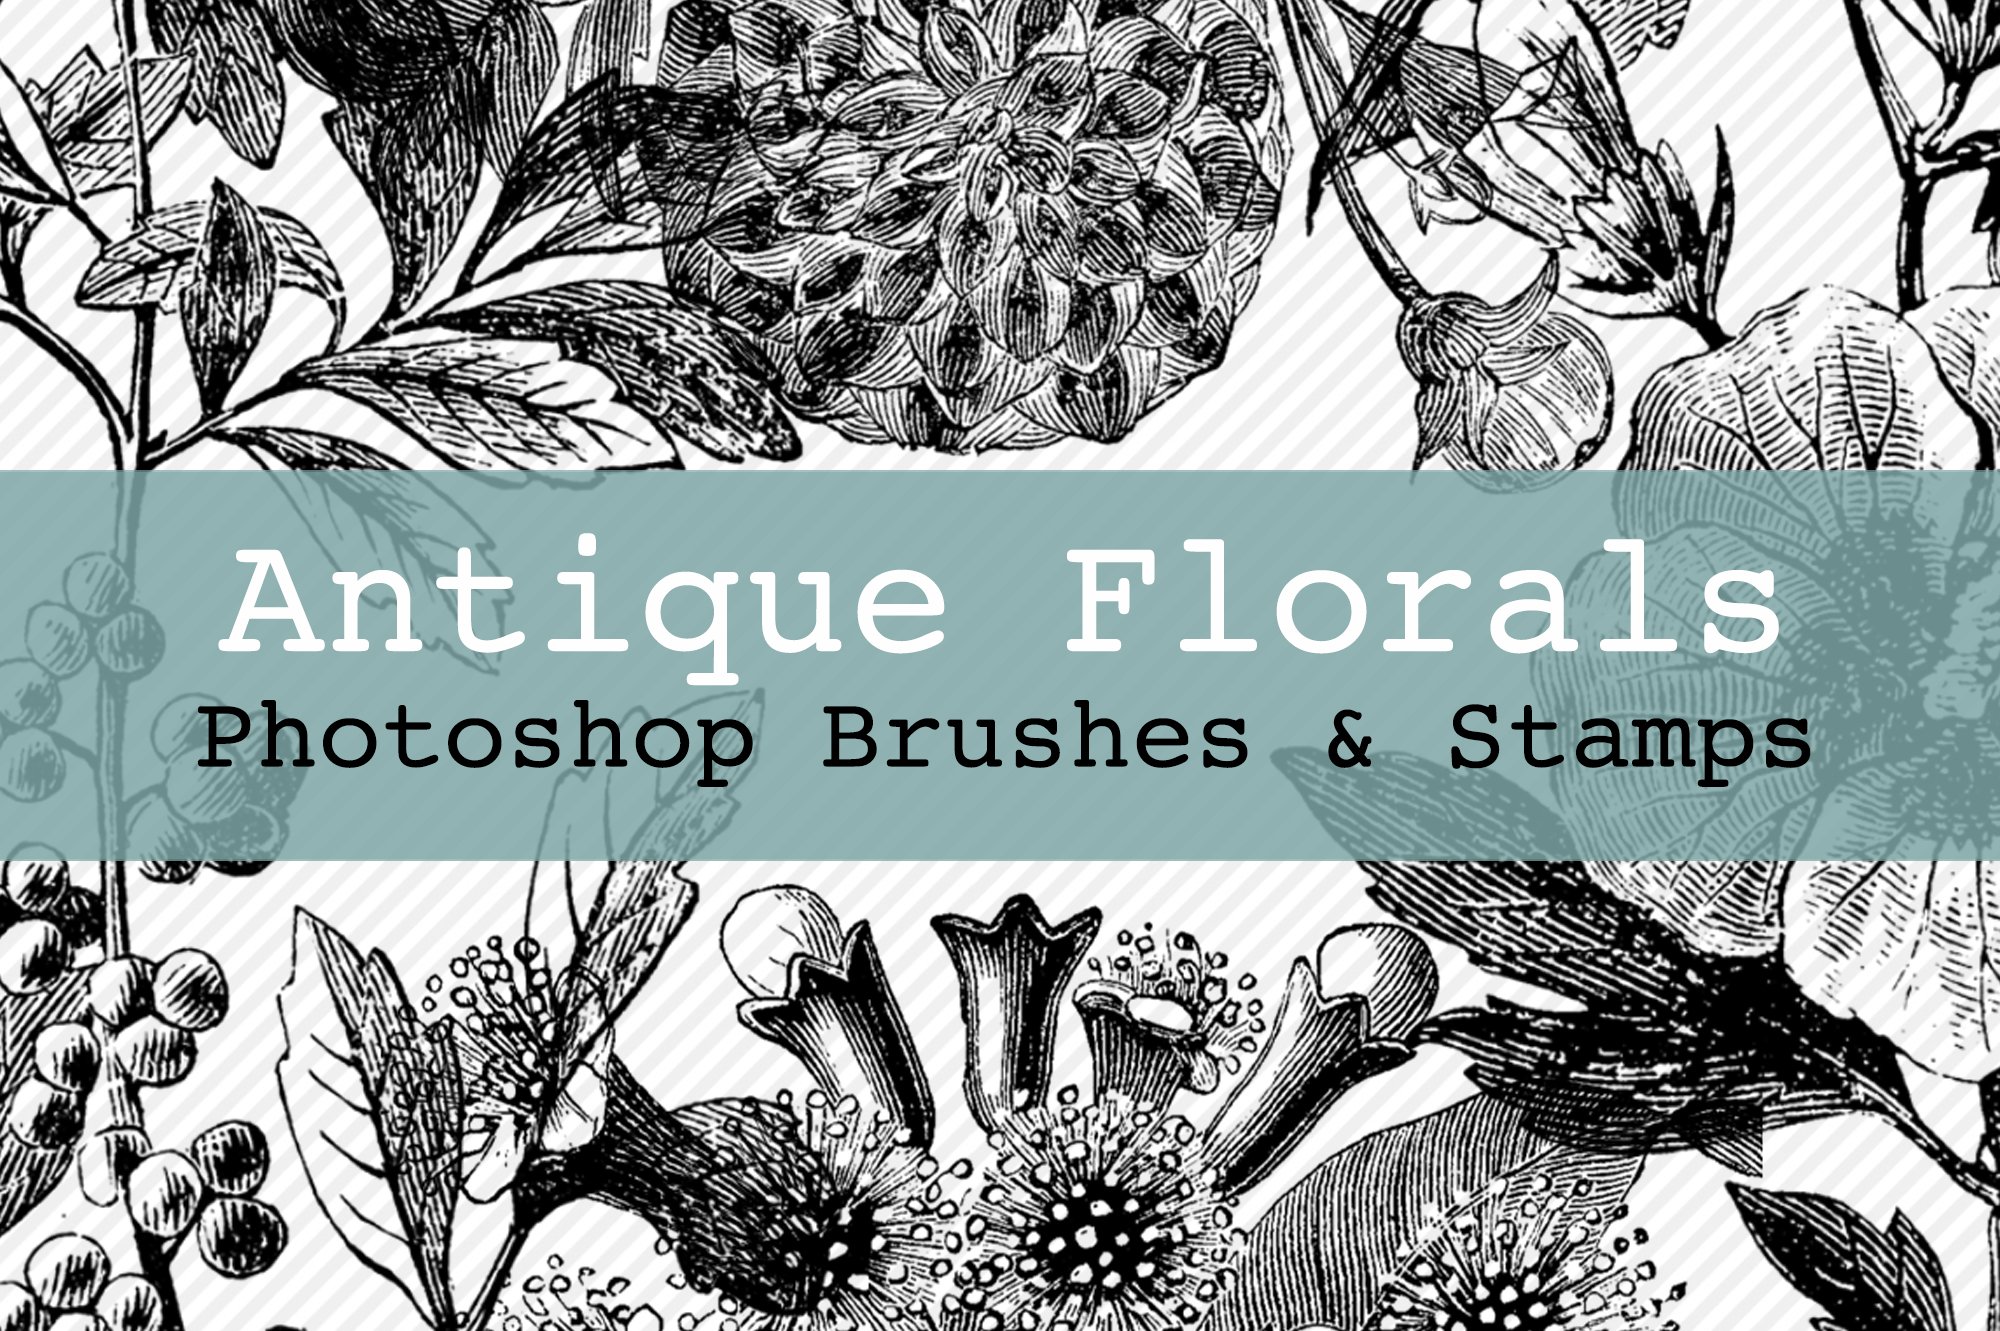 Antique Florals PS Brushes & Stampscover image.